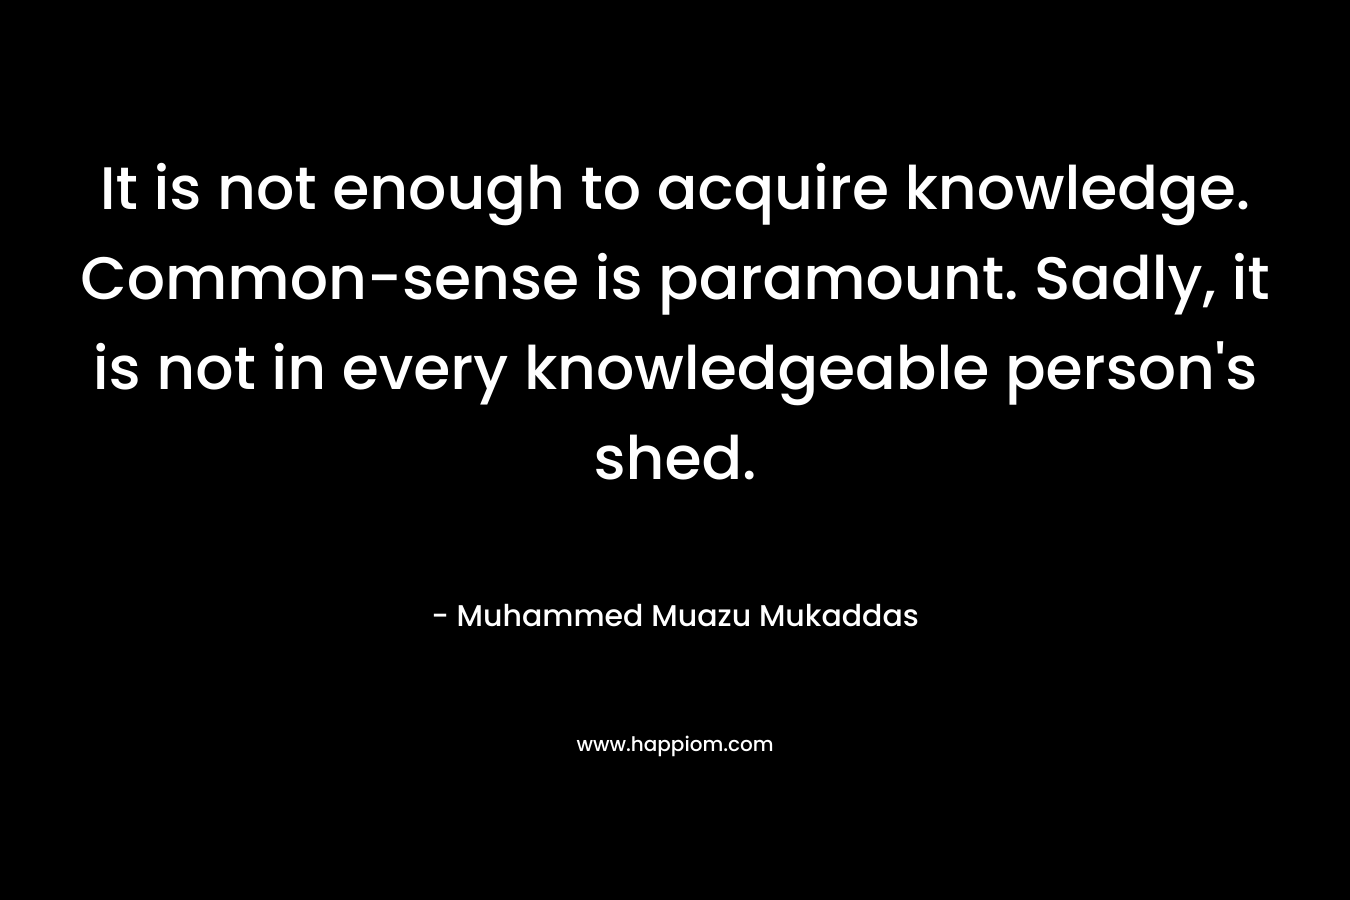 It is not enough to acquire knowledge. Common-sense is paramount. Sadly, it is not in every knowledgeable person's shed.